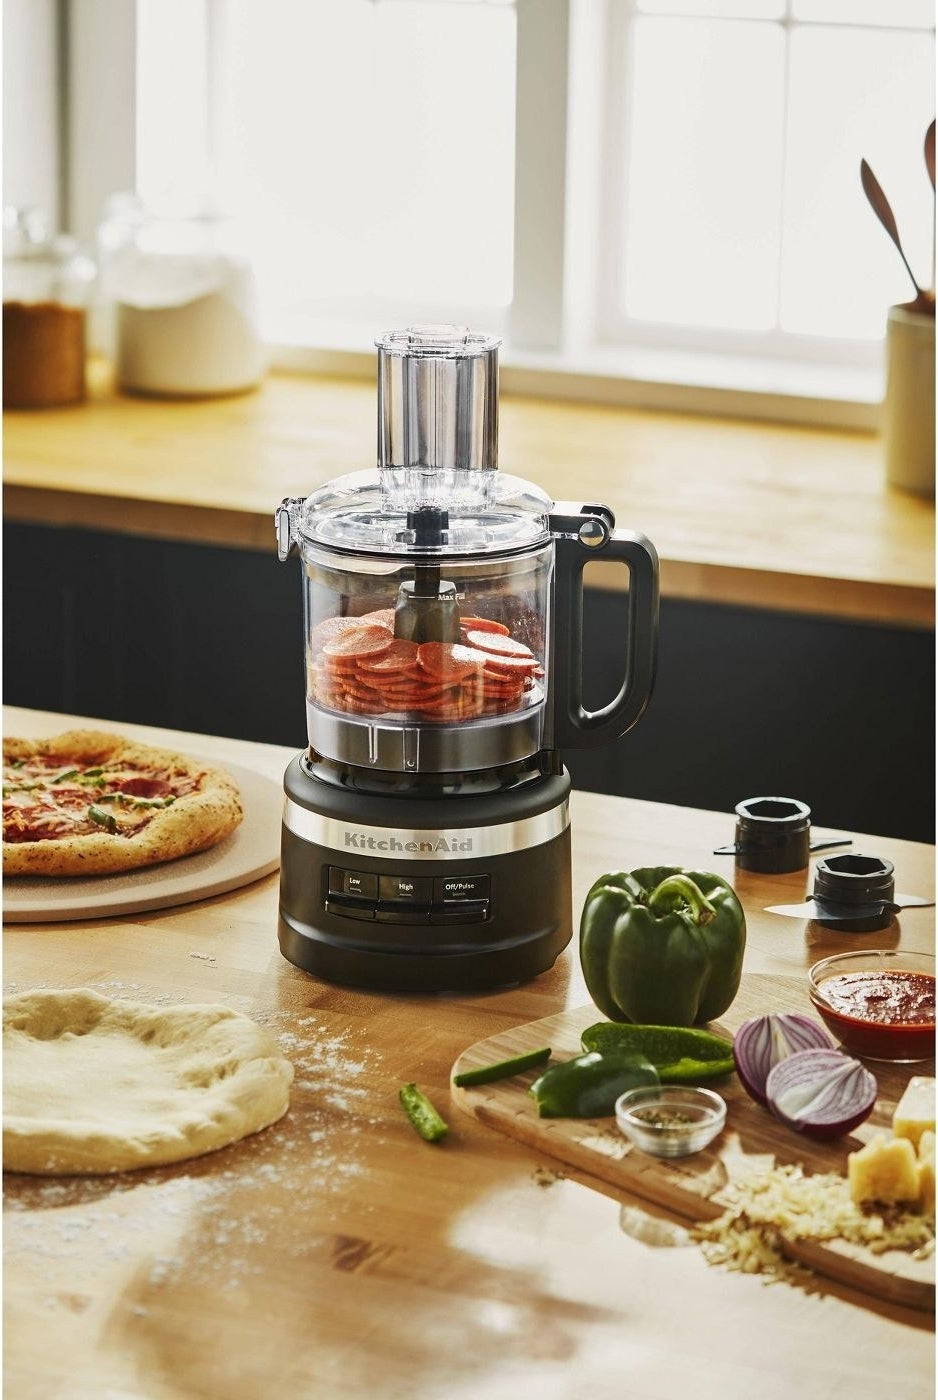 the food processor surrounded by pizza ingredients